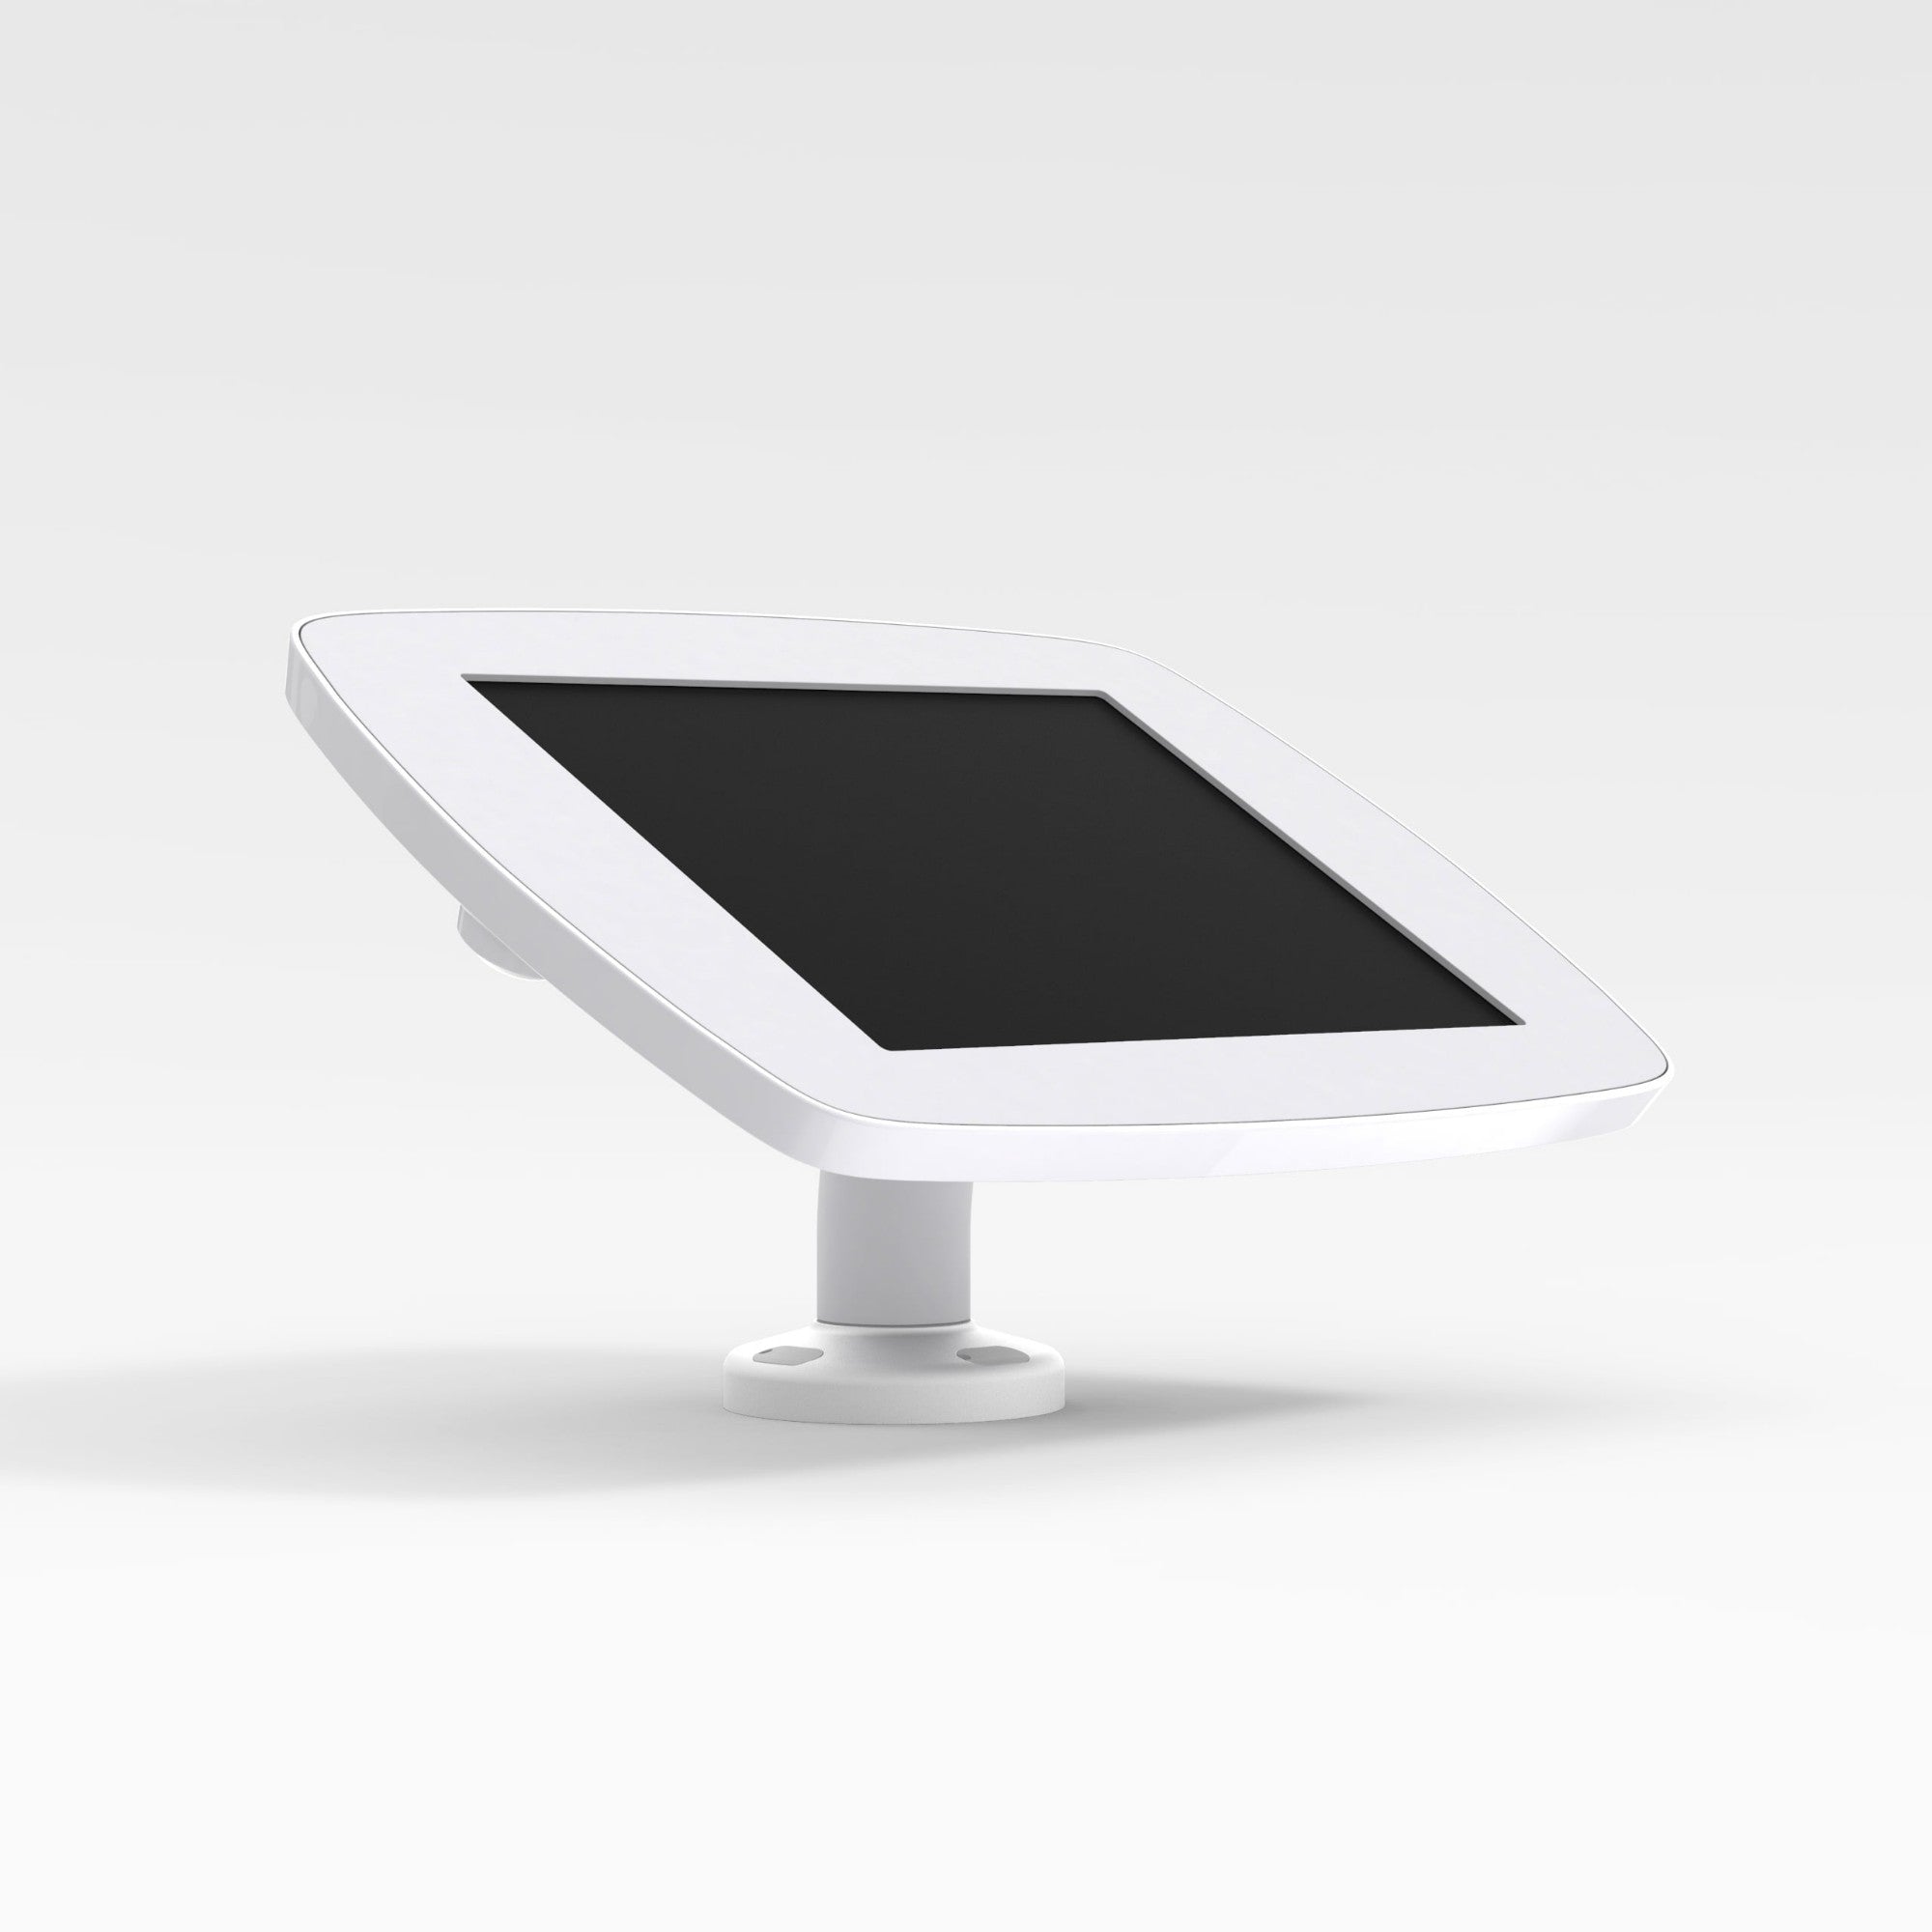 Bouncepad Swivel Desk | Apple iPad Air 1st Gen 9.7 (2013) | White | Covered Front Camera and Home Button |